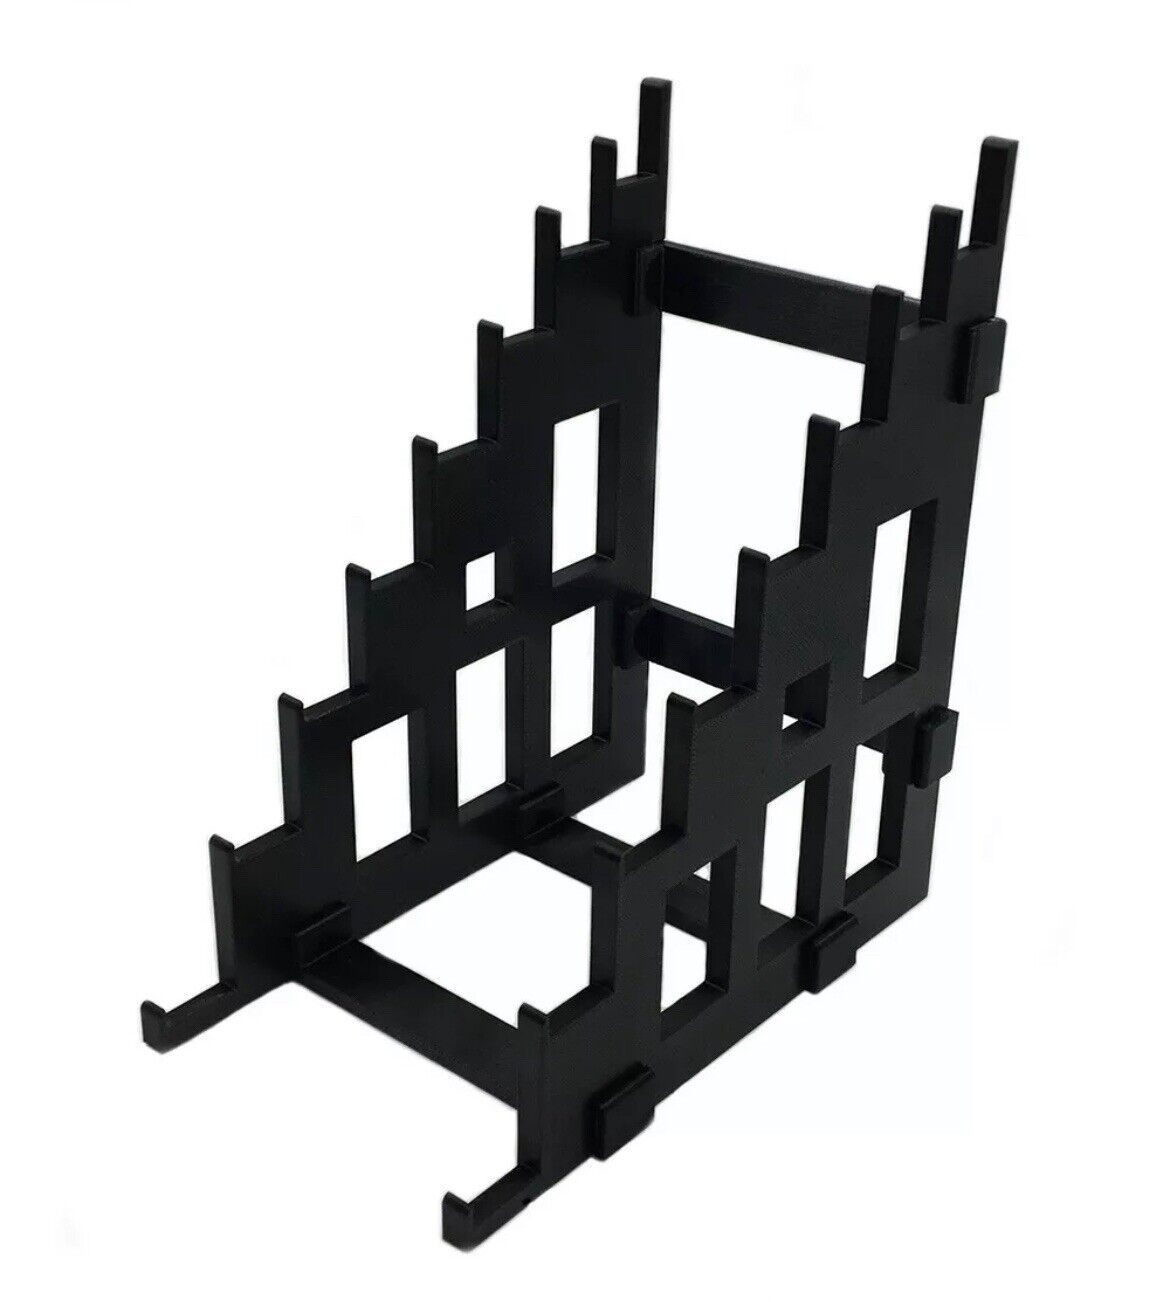 Knife Display Rack - Knife Stand For 8 Small to Medium Knives - High Quality